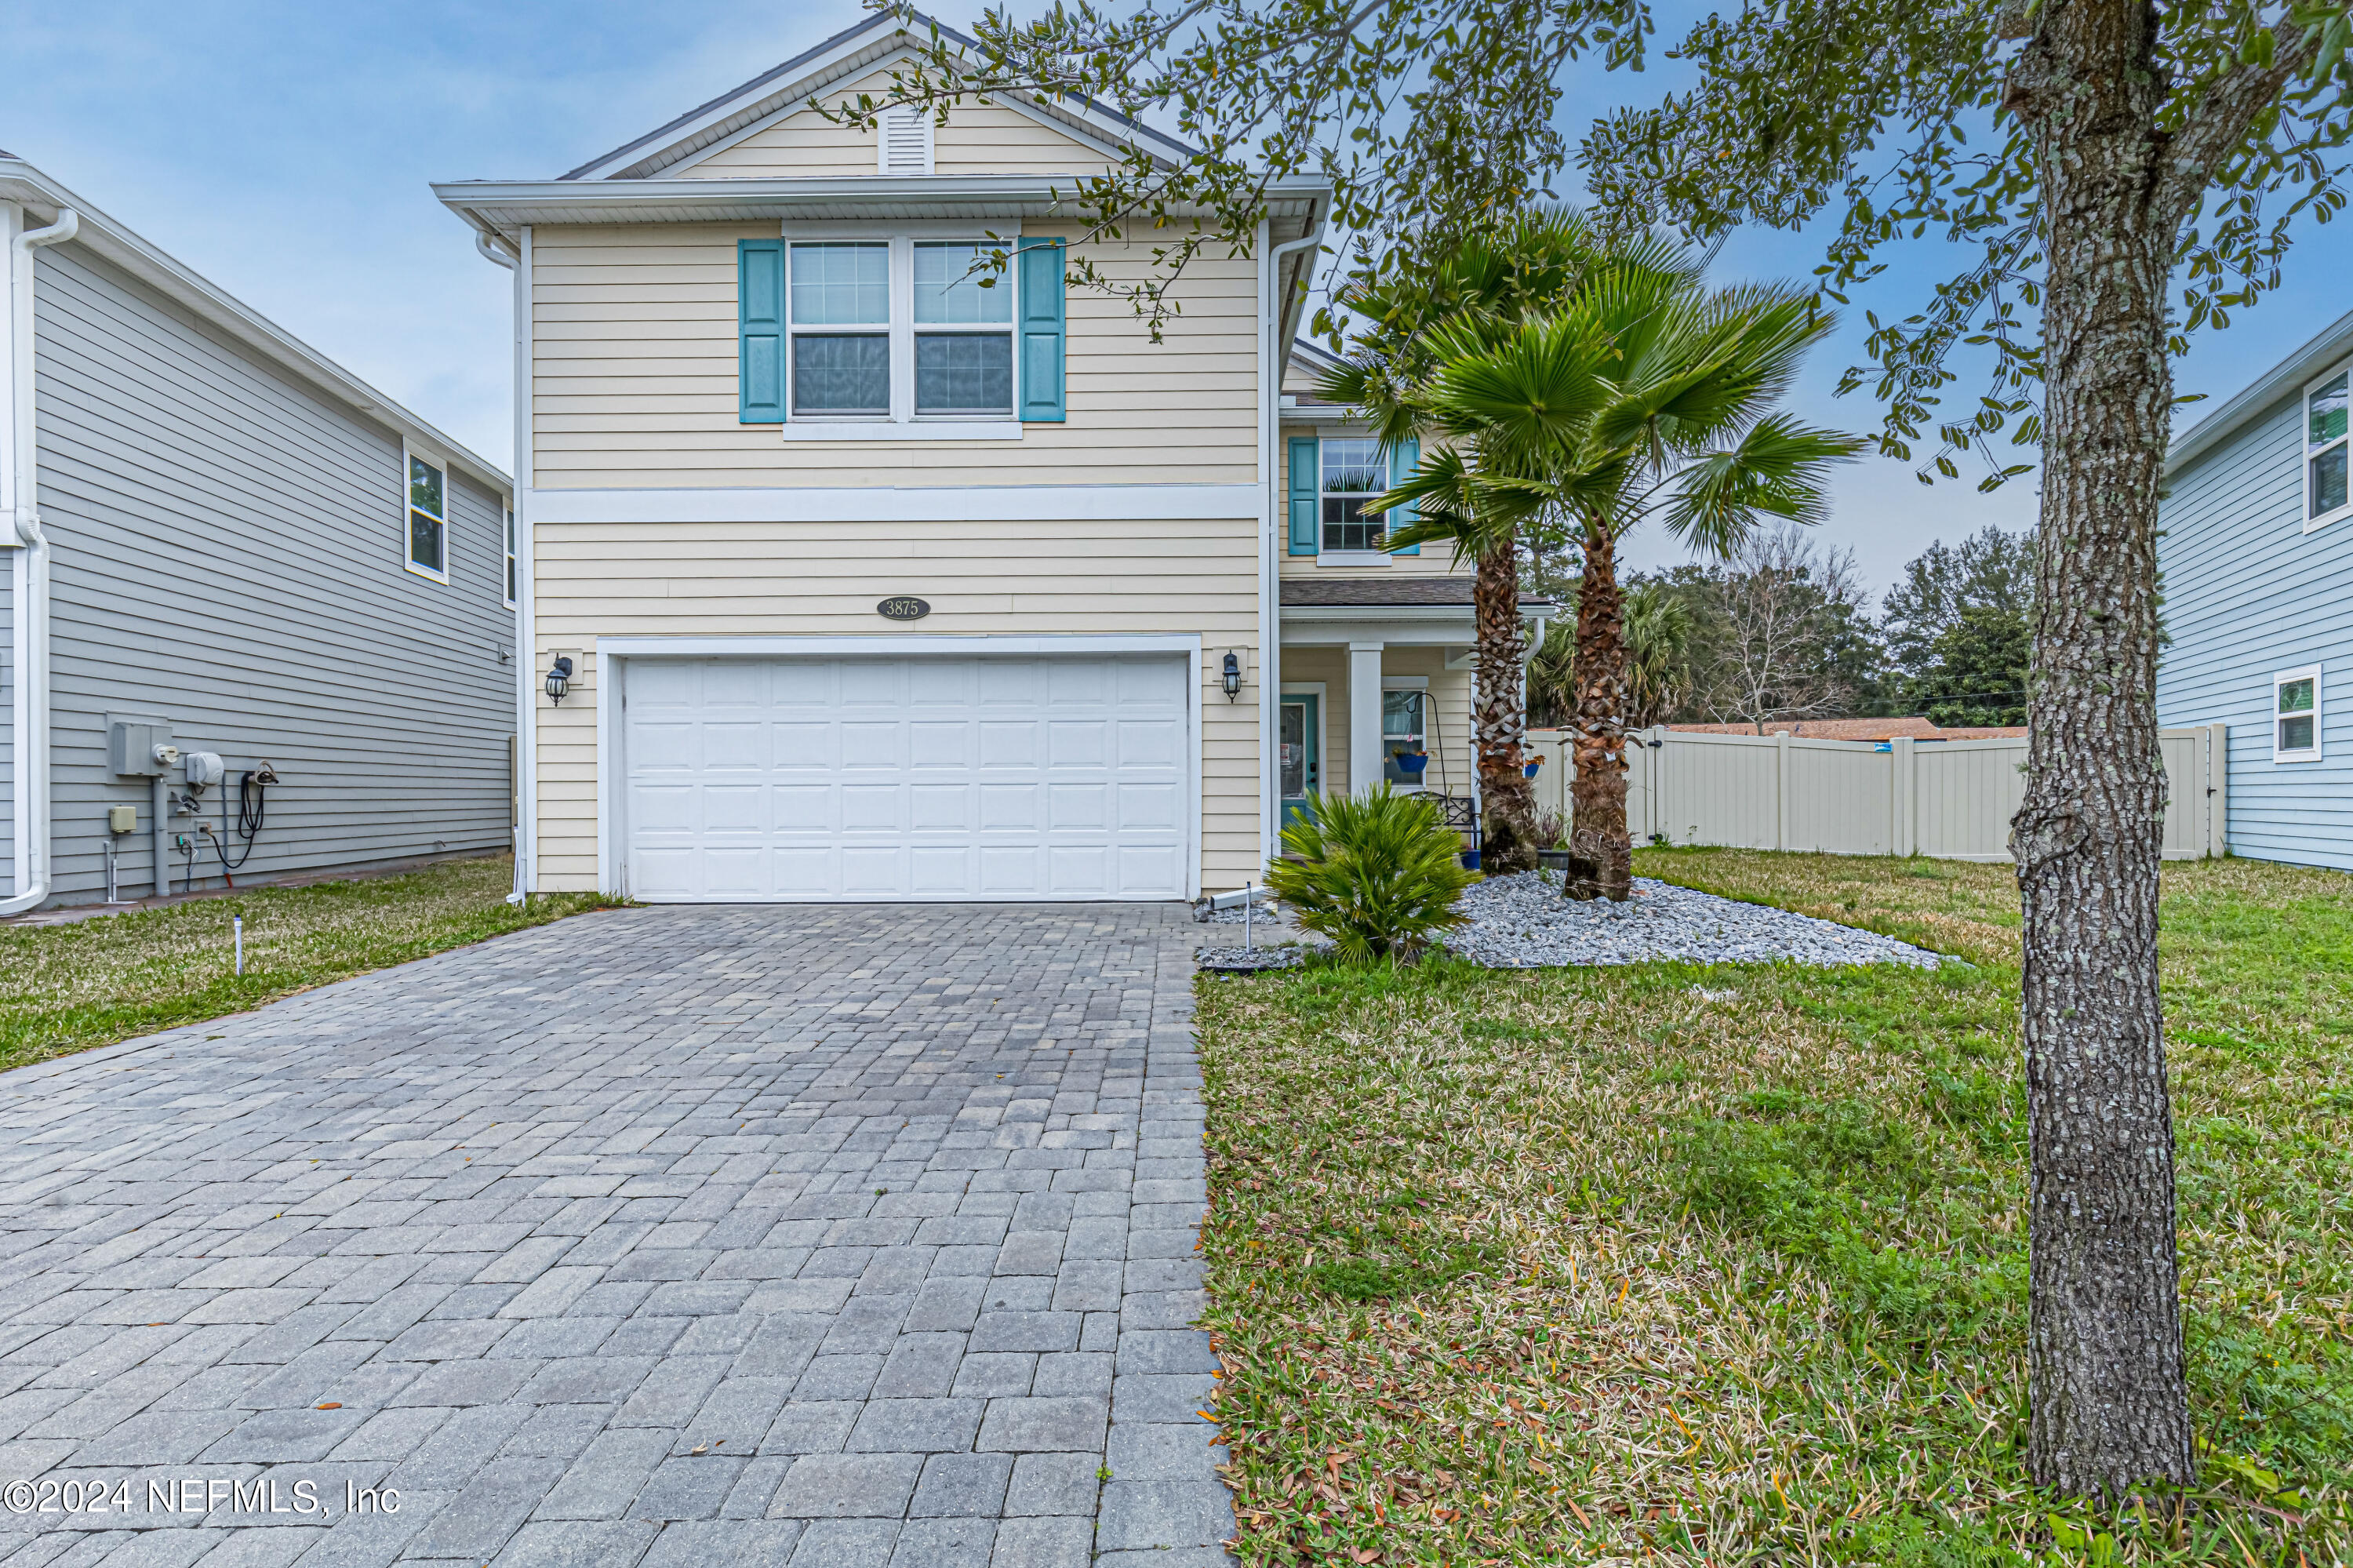 Jacksonville, FL home for sale located at 3875 Coastal Cove Circle, Jacksonville, FL 32224